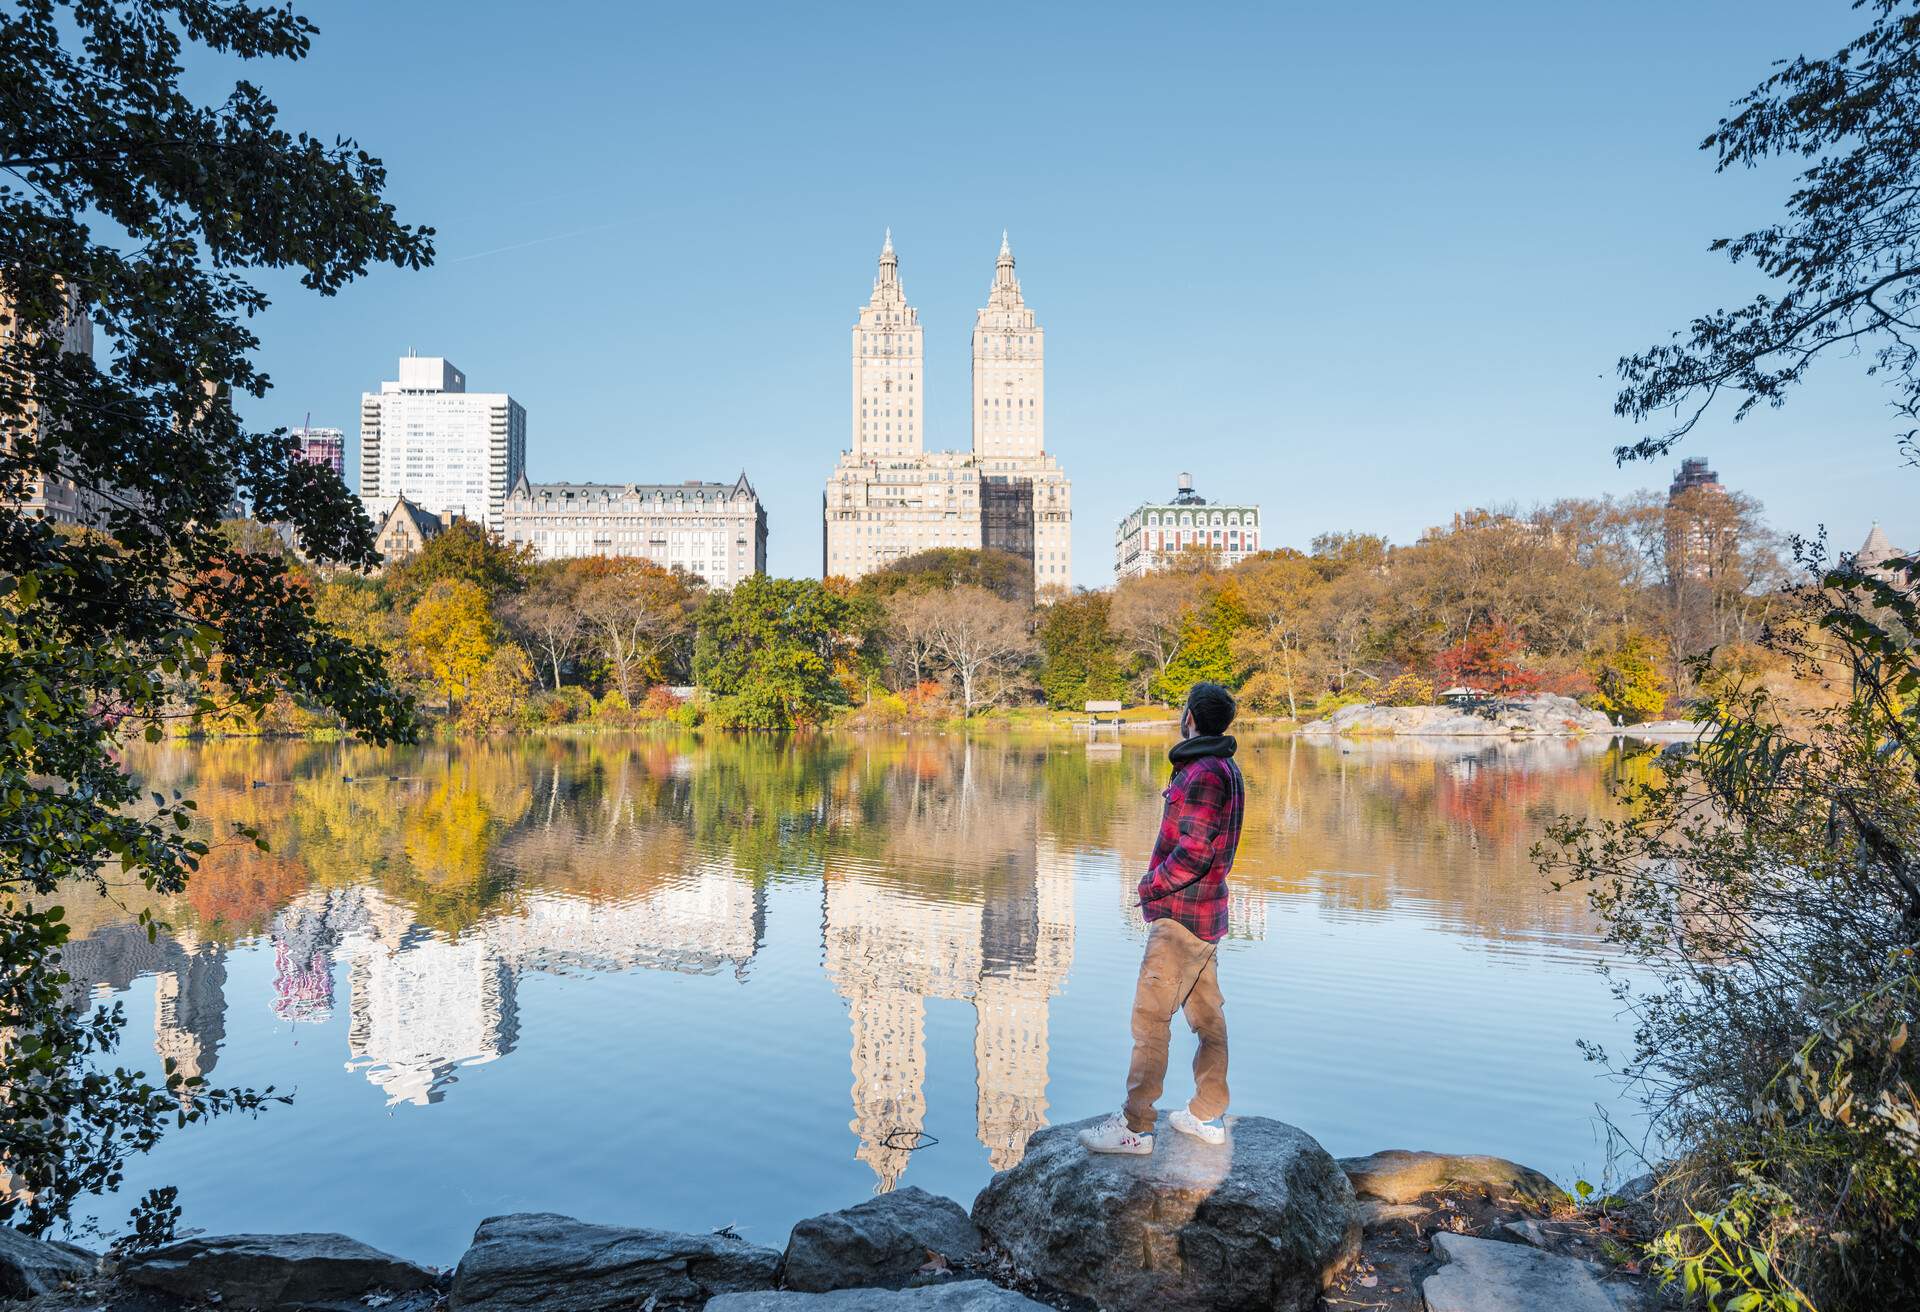 Man standing on rock overlooking lake in central park on a sunny fall day. New York City, USA